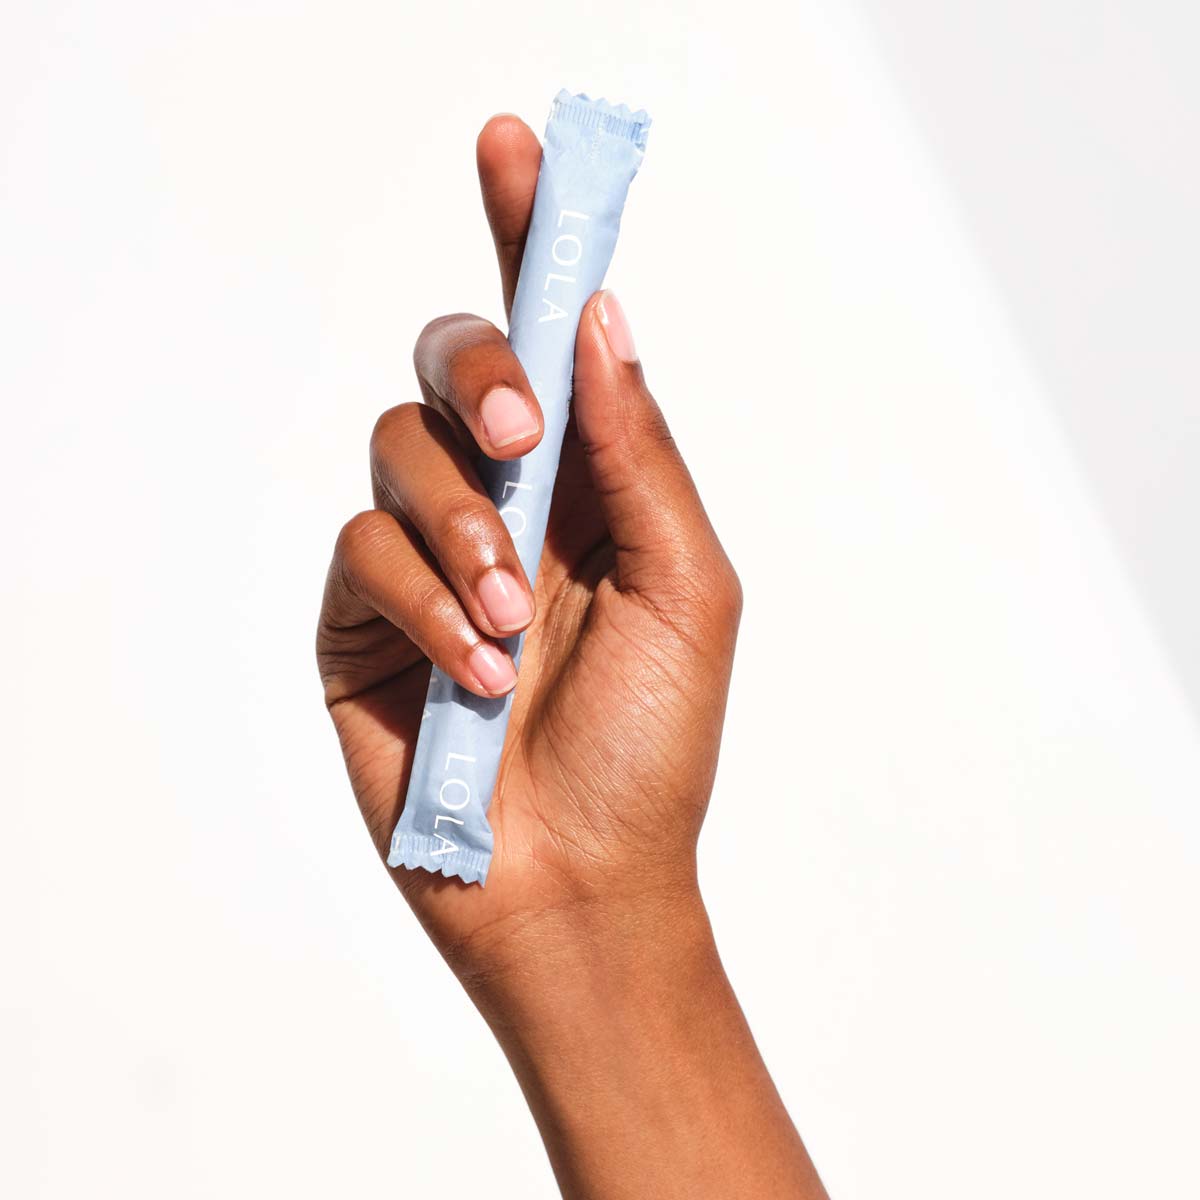 Organic Tampons with Applicator